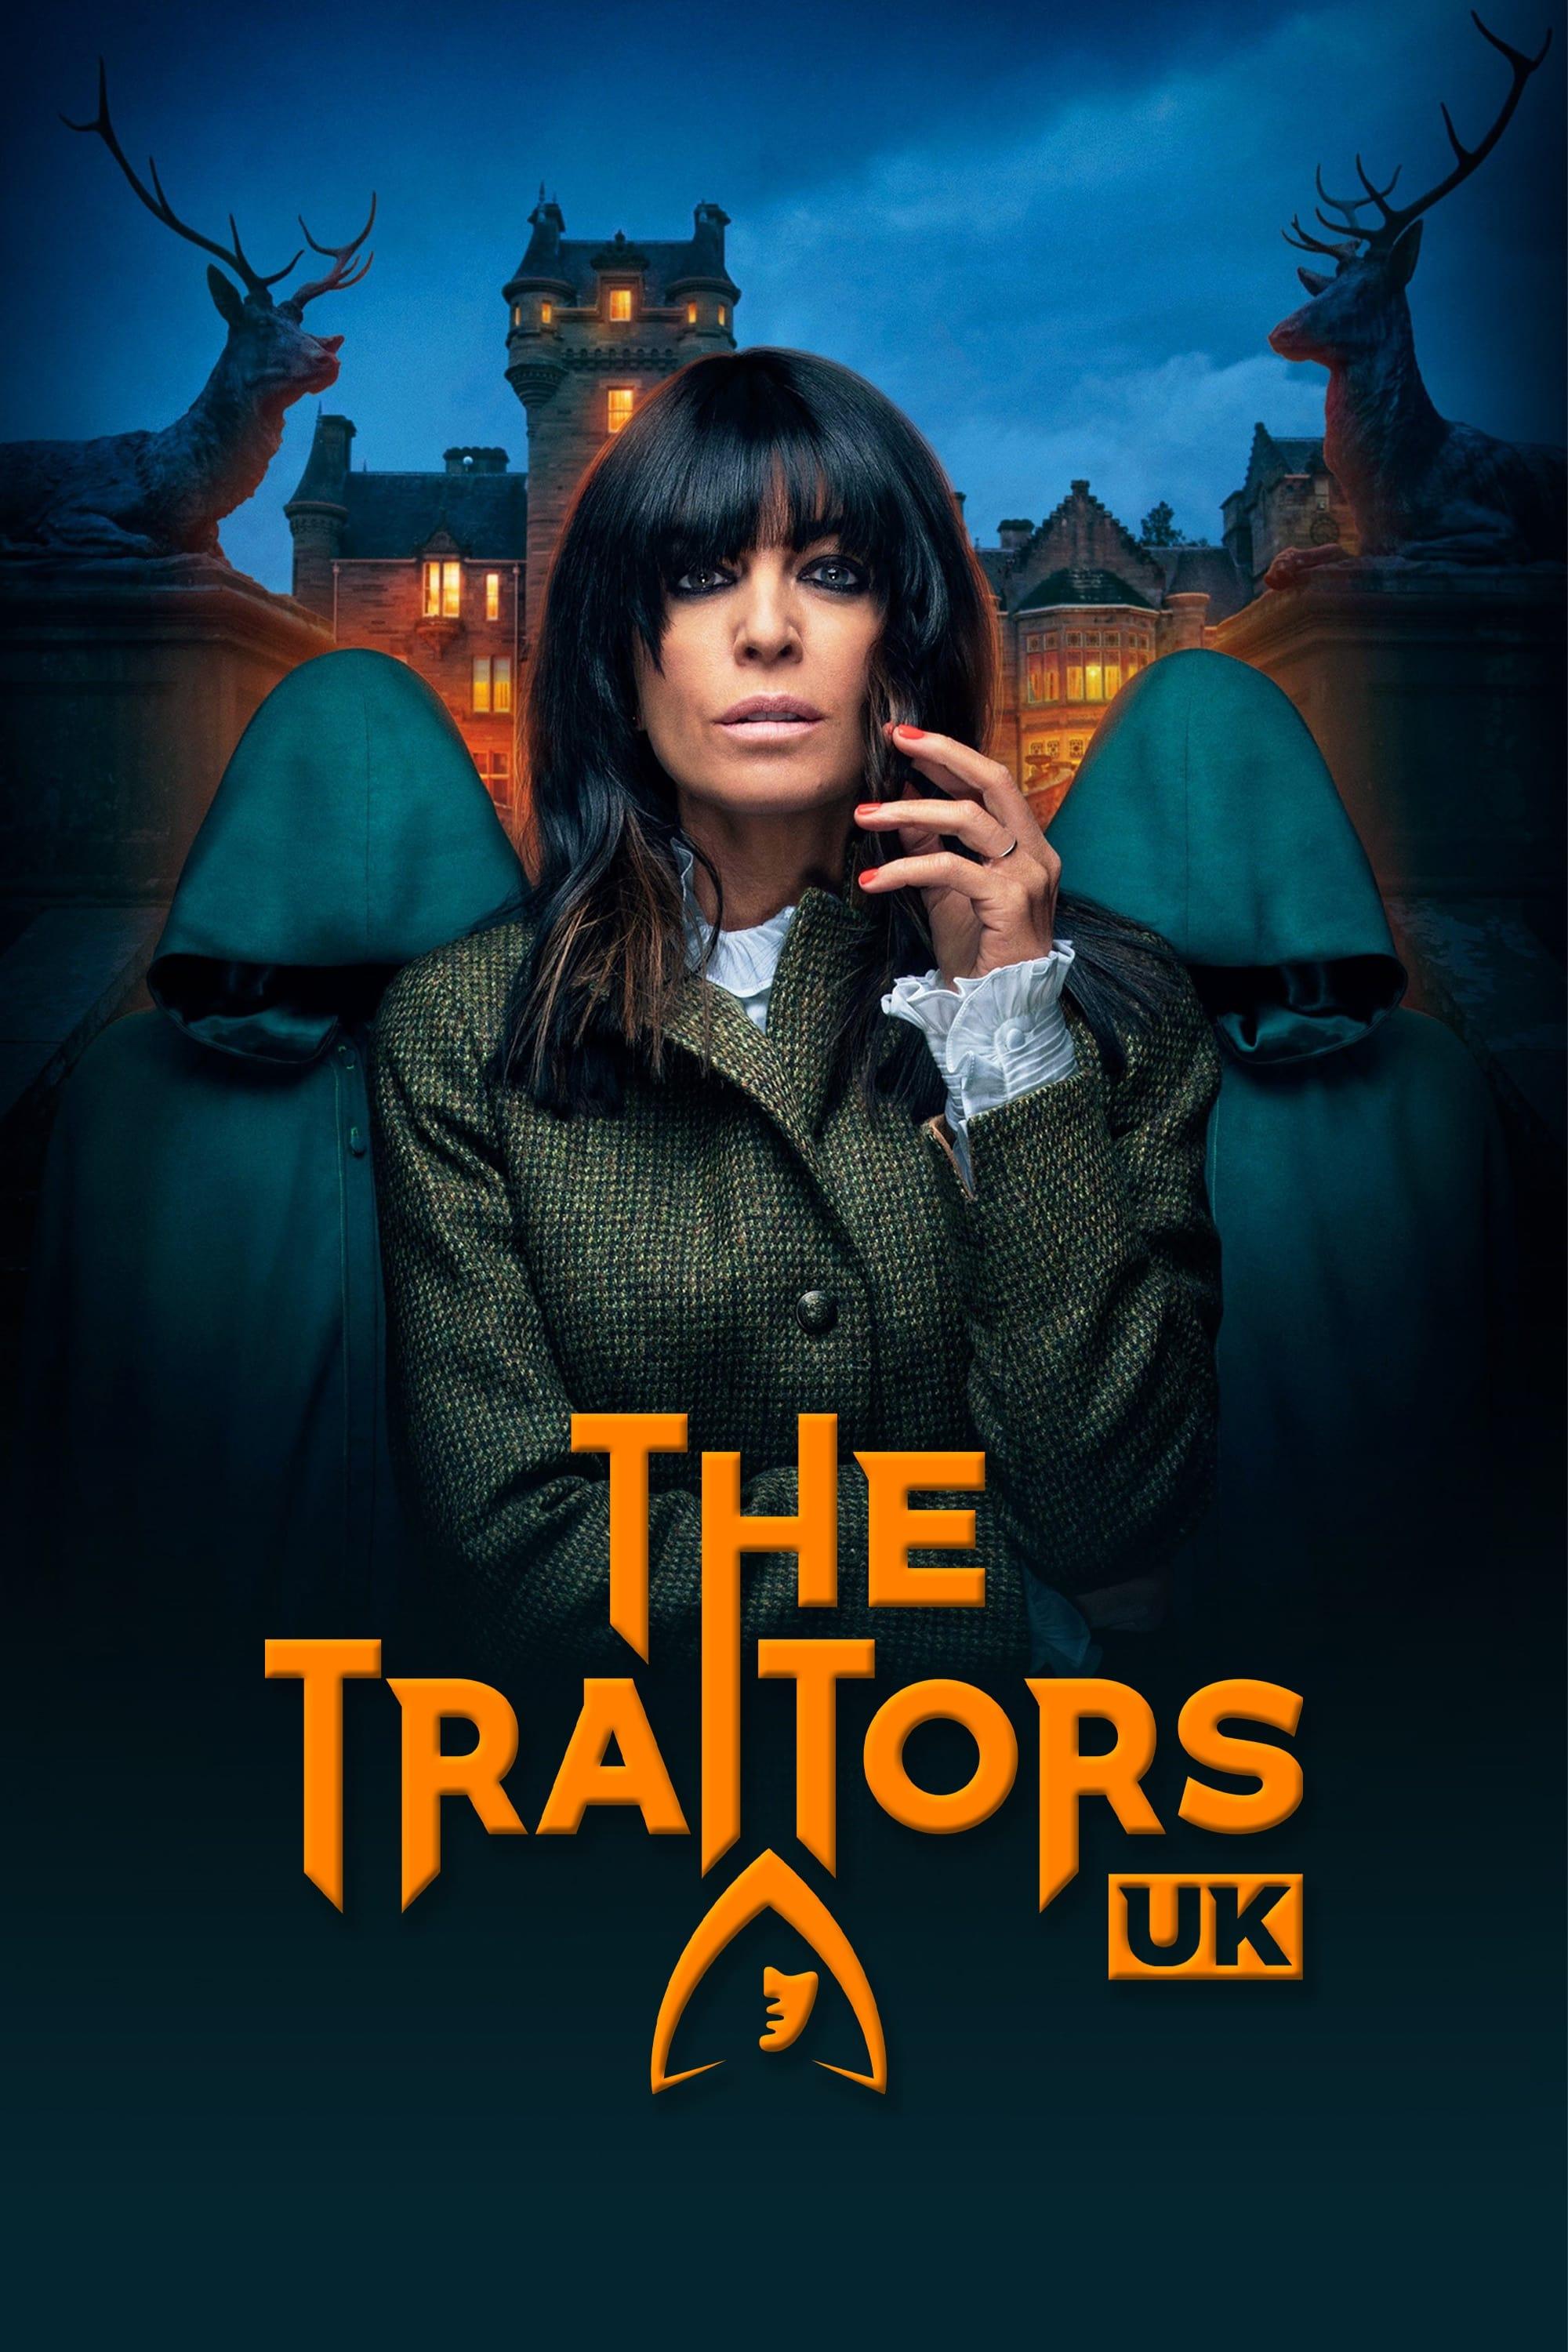 The Traitors poster